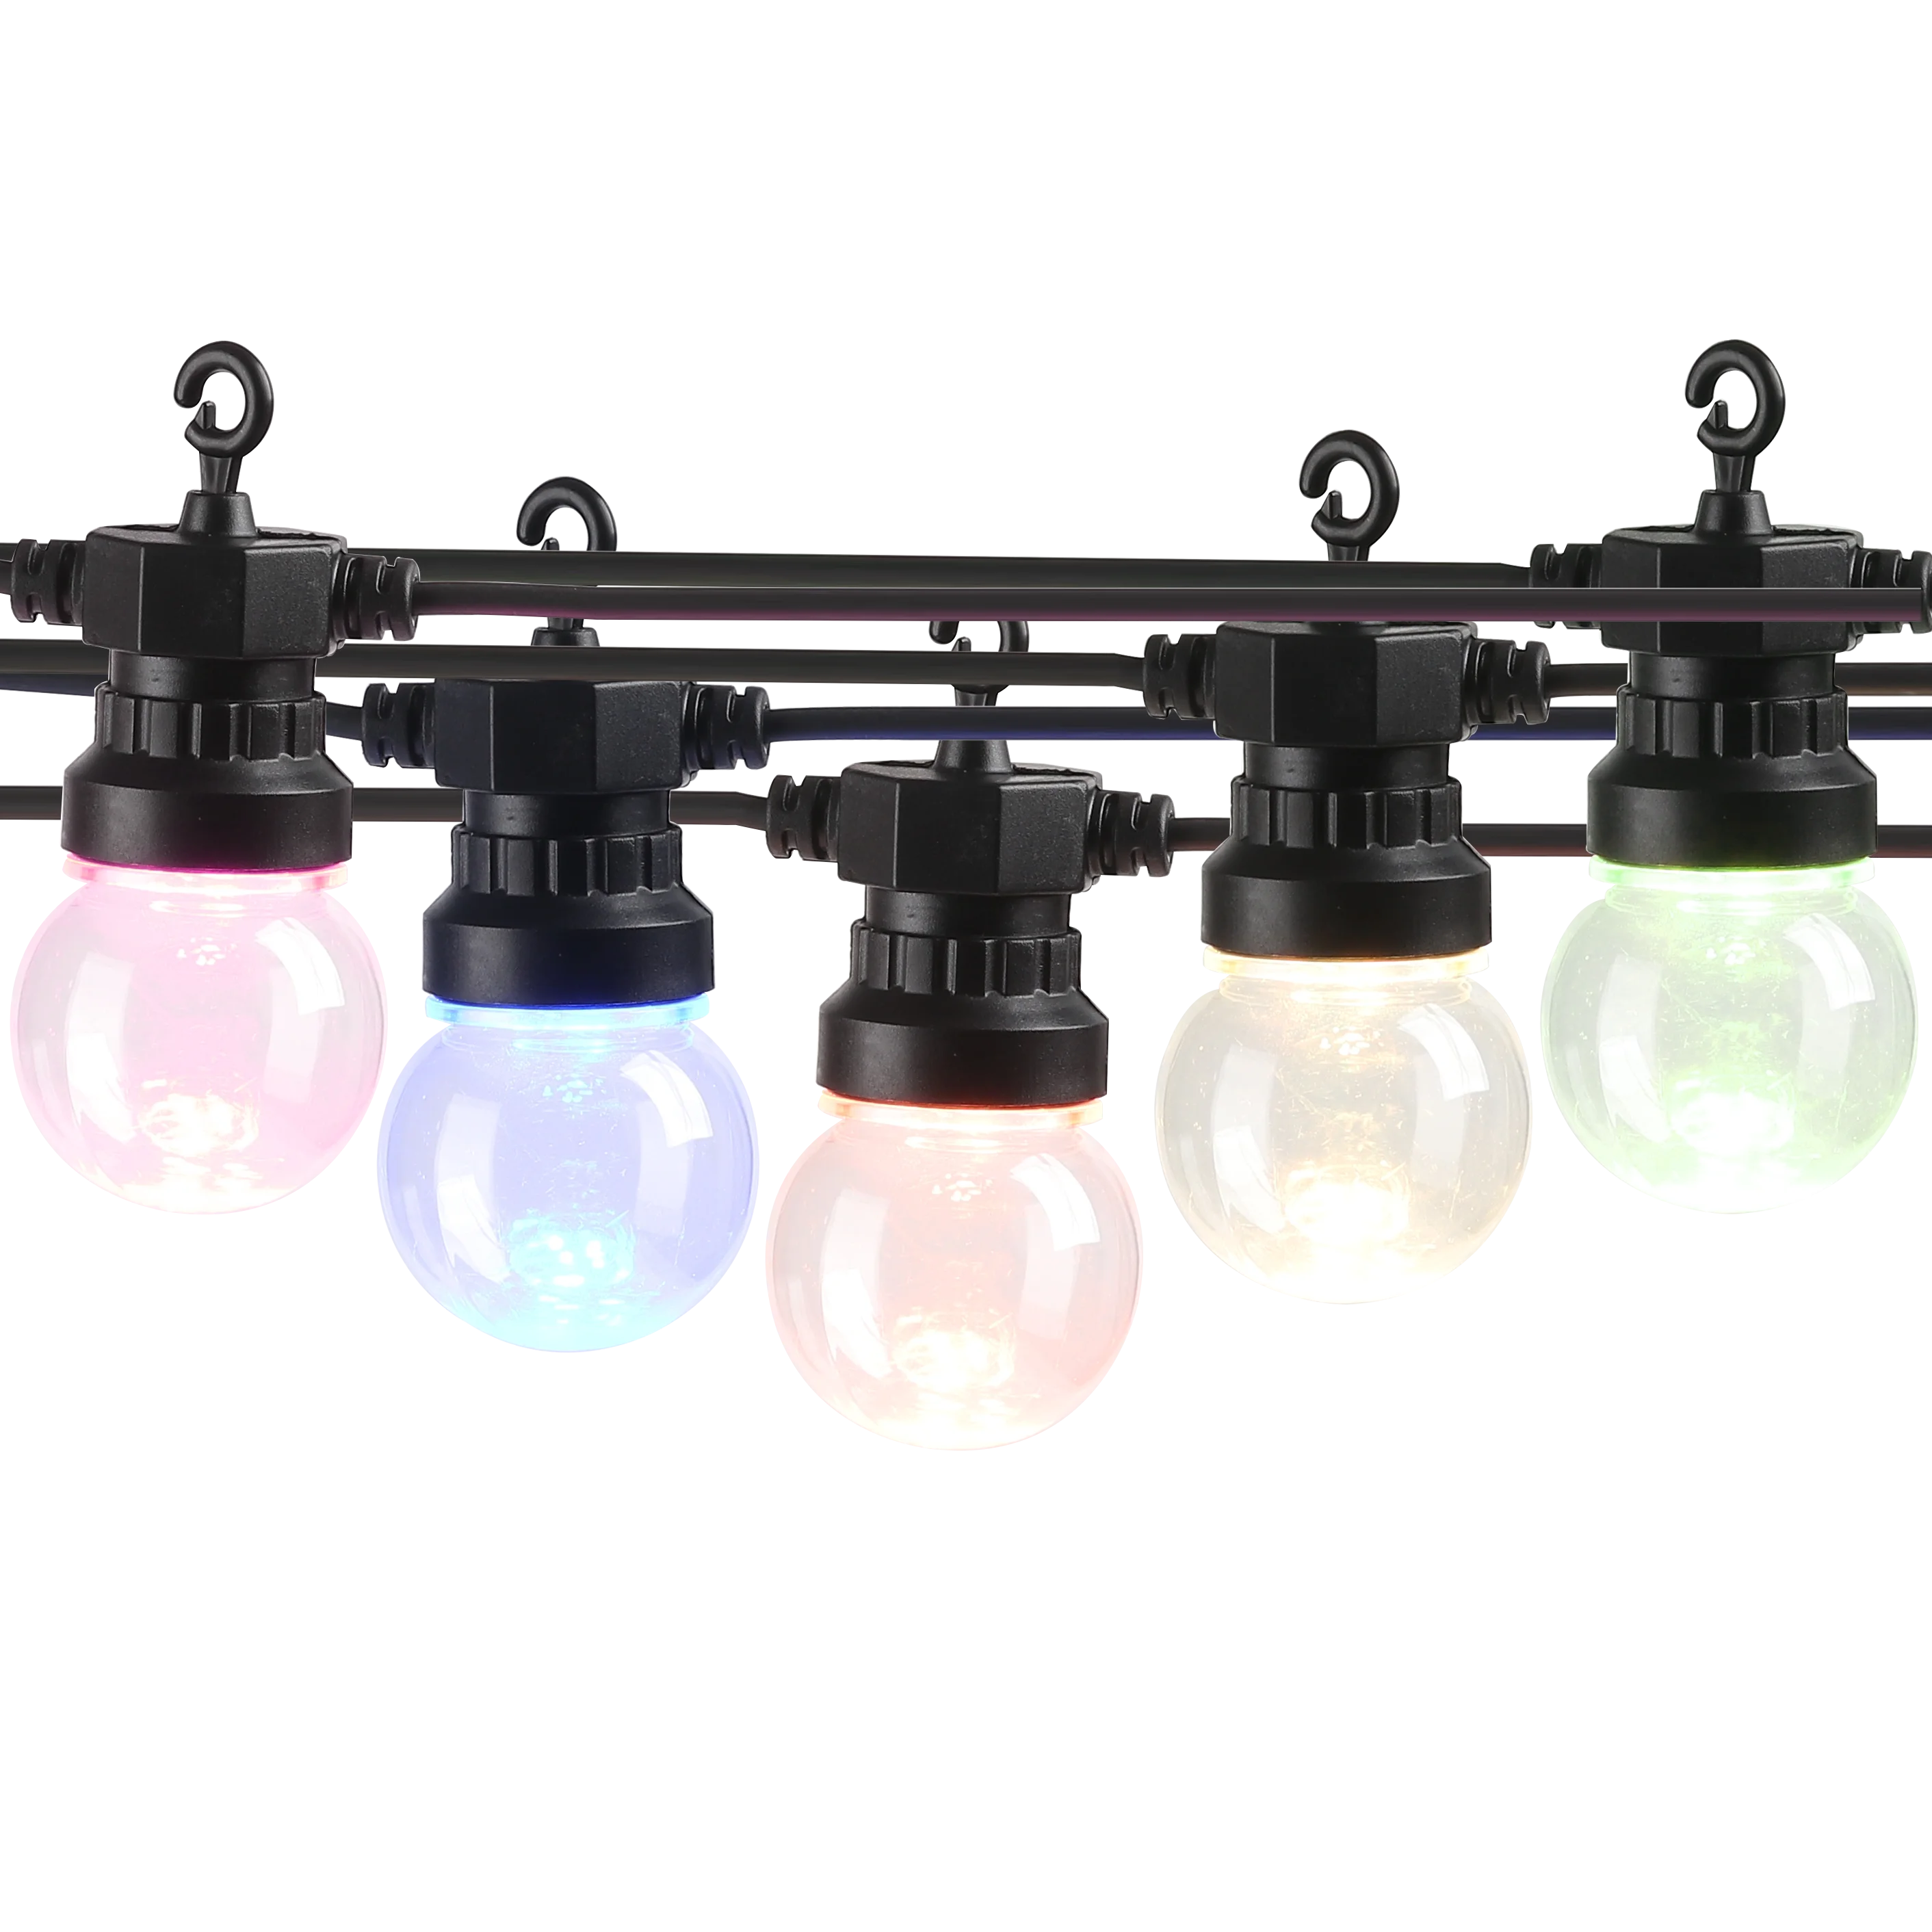 Smart string light outdoor flexible led Light WiFI string Hanging Sockets Perfect Patio Lights work with google and Alexa